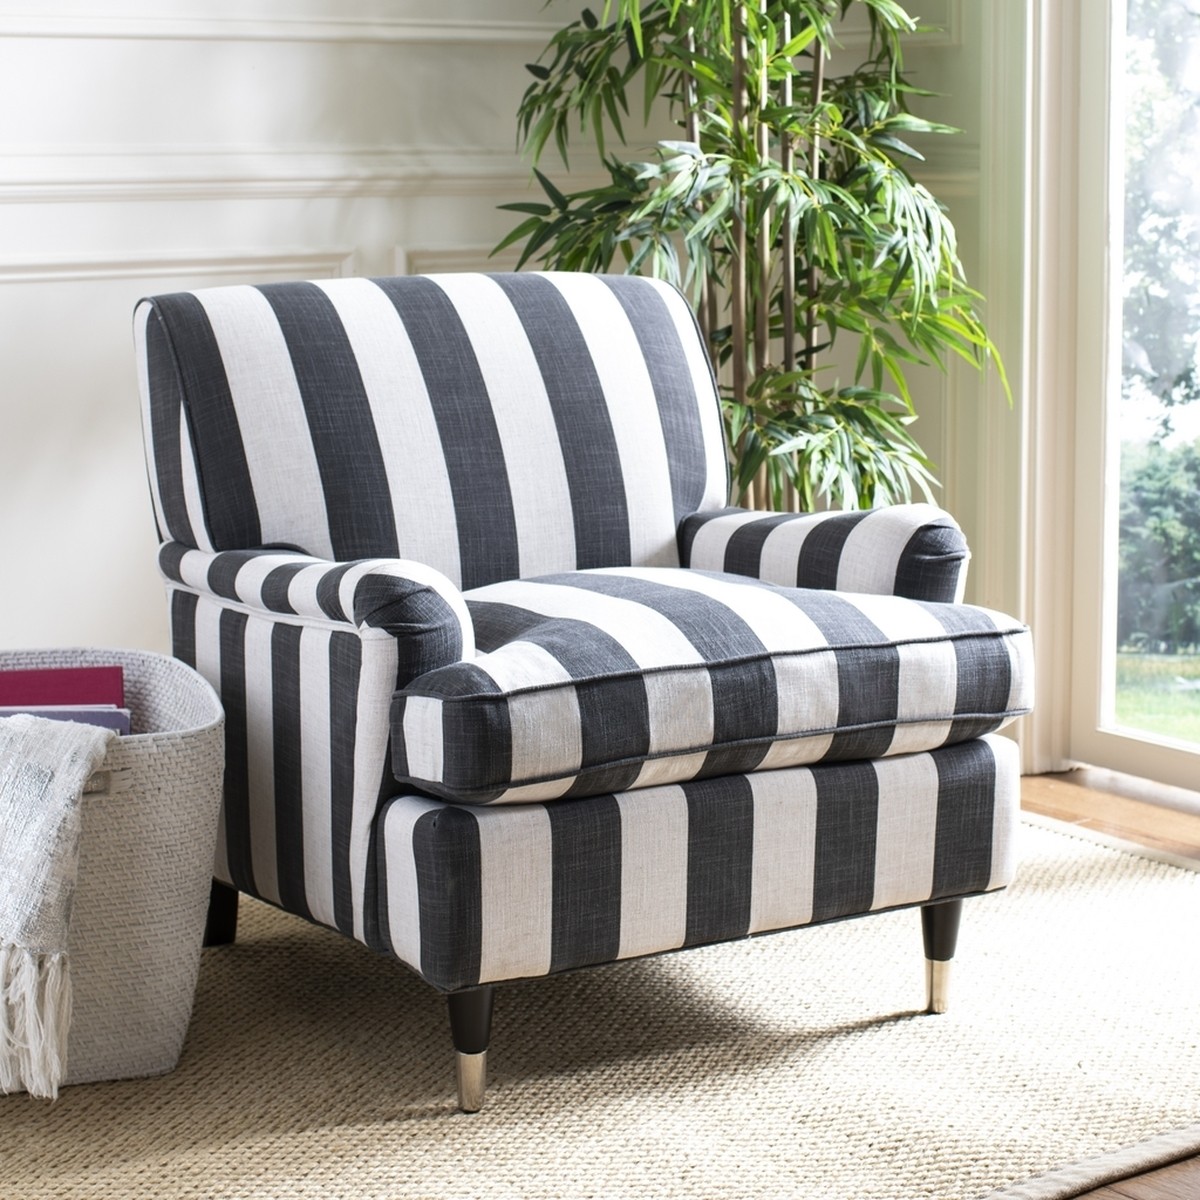 Striped armchair accent chairs